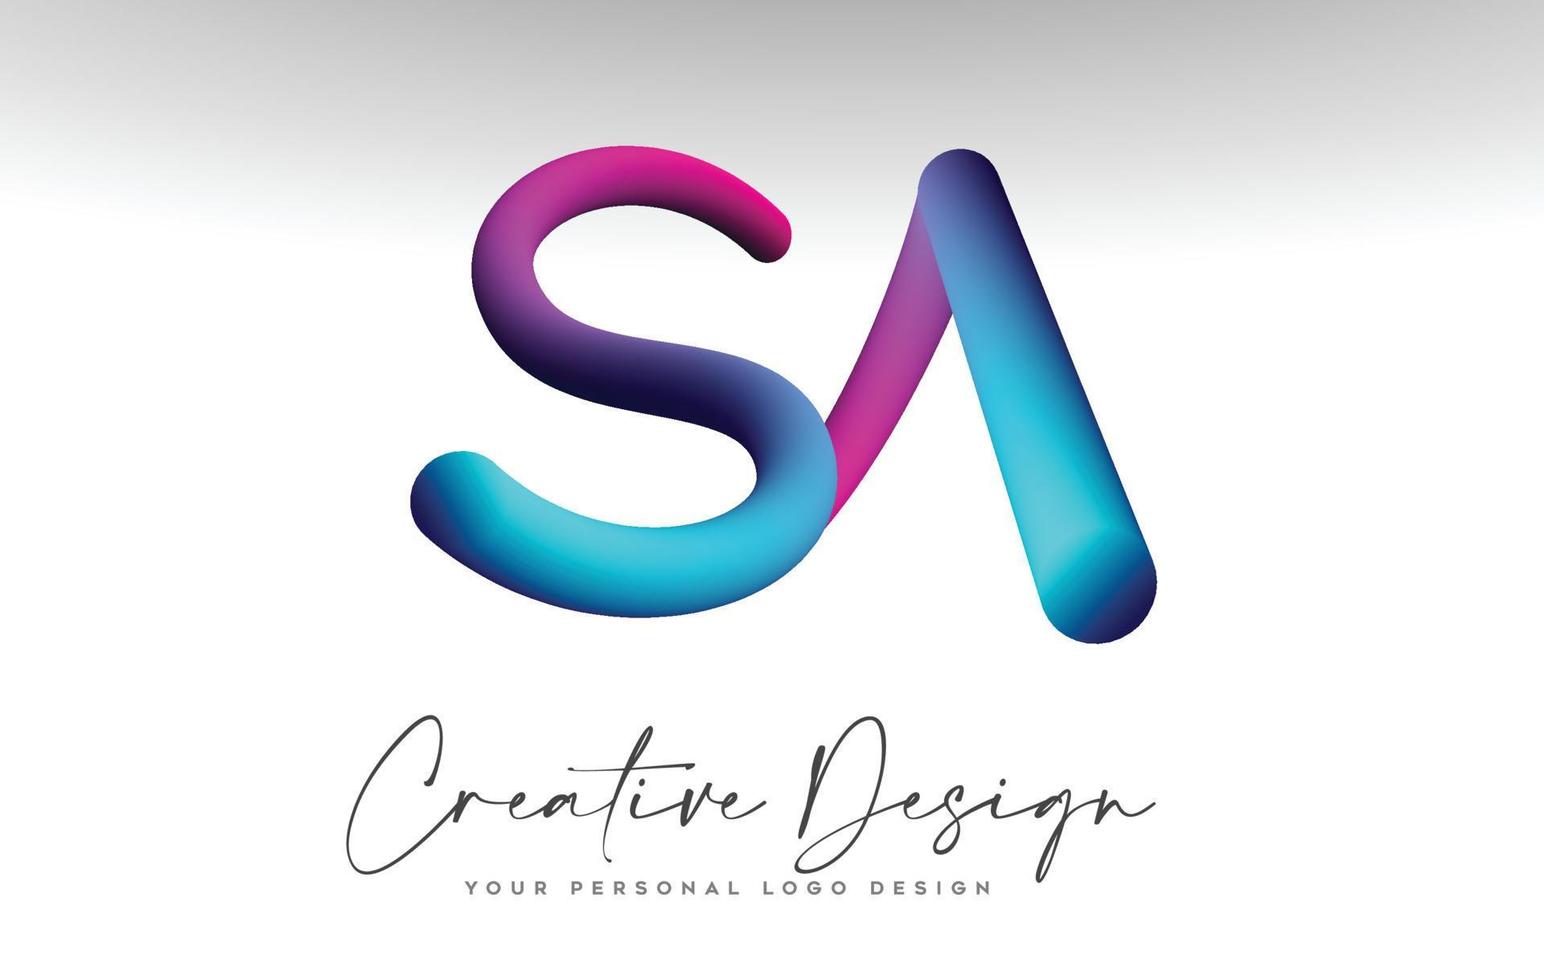 SA Letter Logo with Blue Purple Gradient 3d Look Vector Illustration